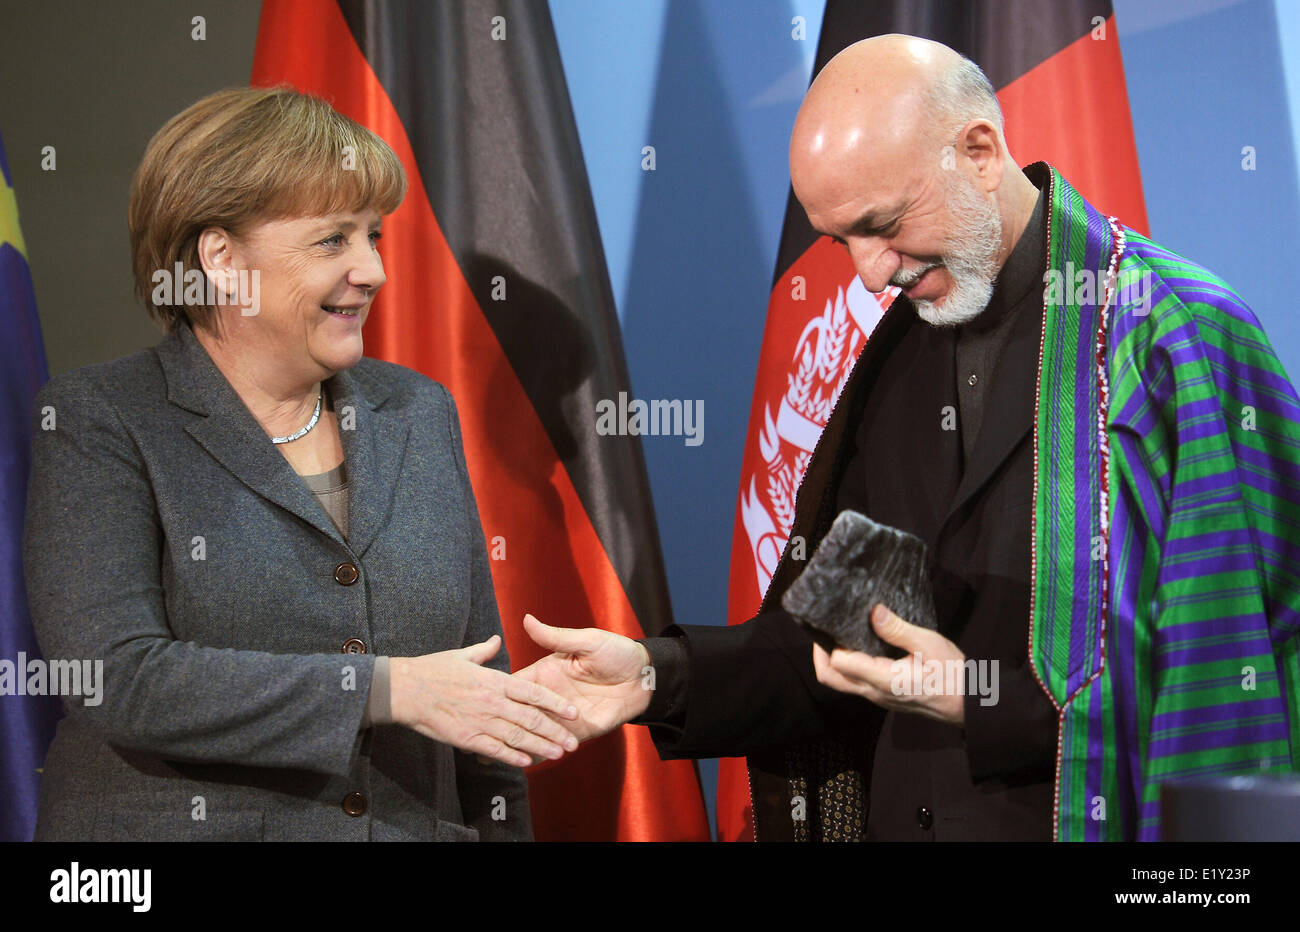 German chancellor Angela Merkel and Afghan president Hamid Karsai shake hands after a press conference in Berlin on the 6th of December in 2011. Stock Photo